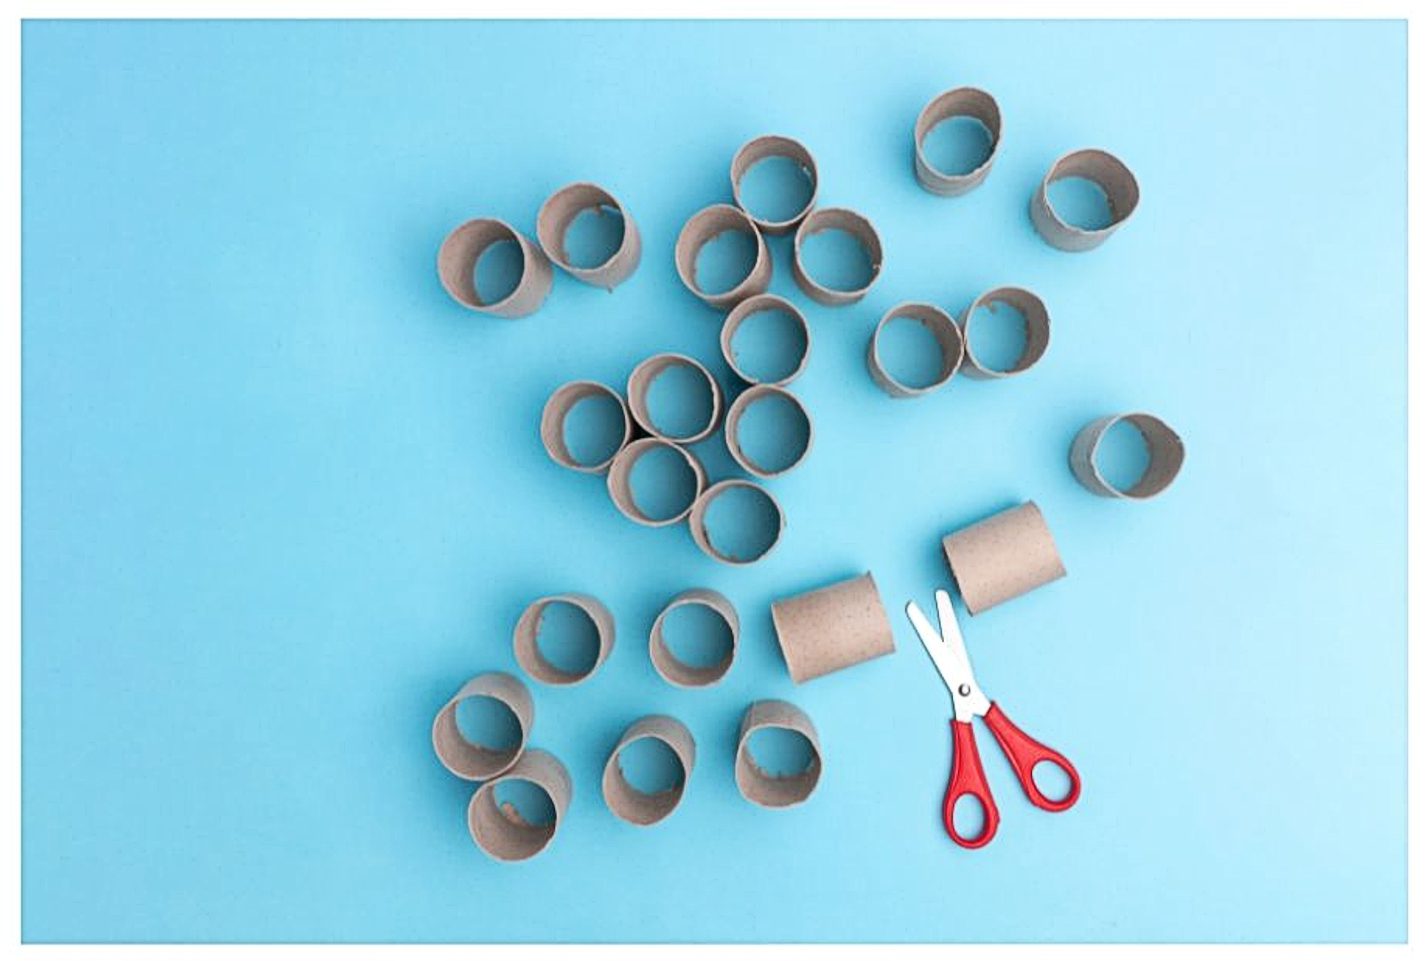 10 Ways to Play with Wrapping Paper Rolls - Paging Supermom  Wrapping  paper rolls, Paper towel crafts, Paper towel roll crafts